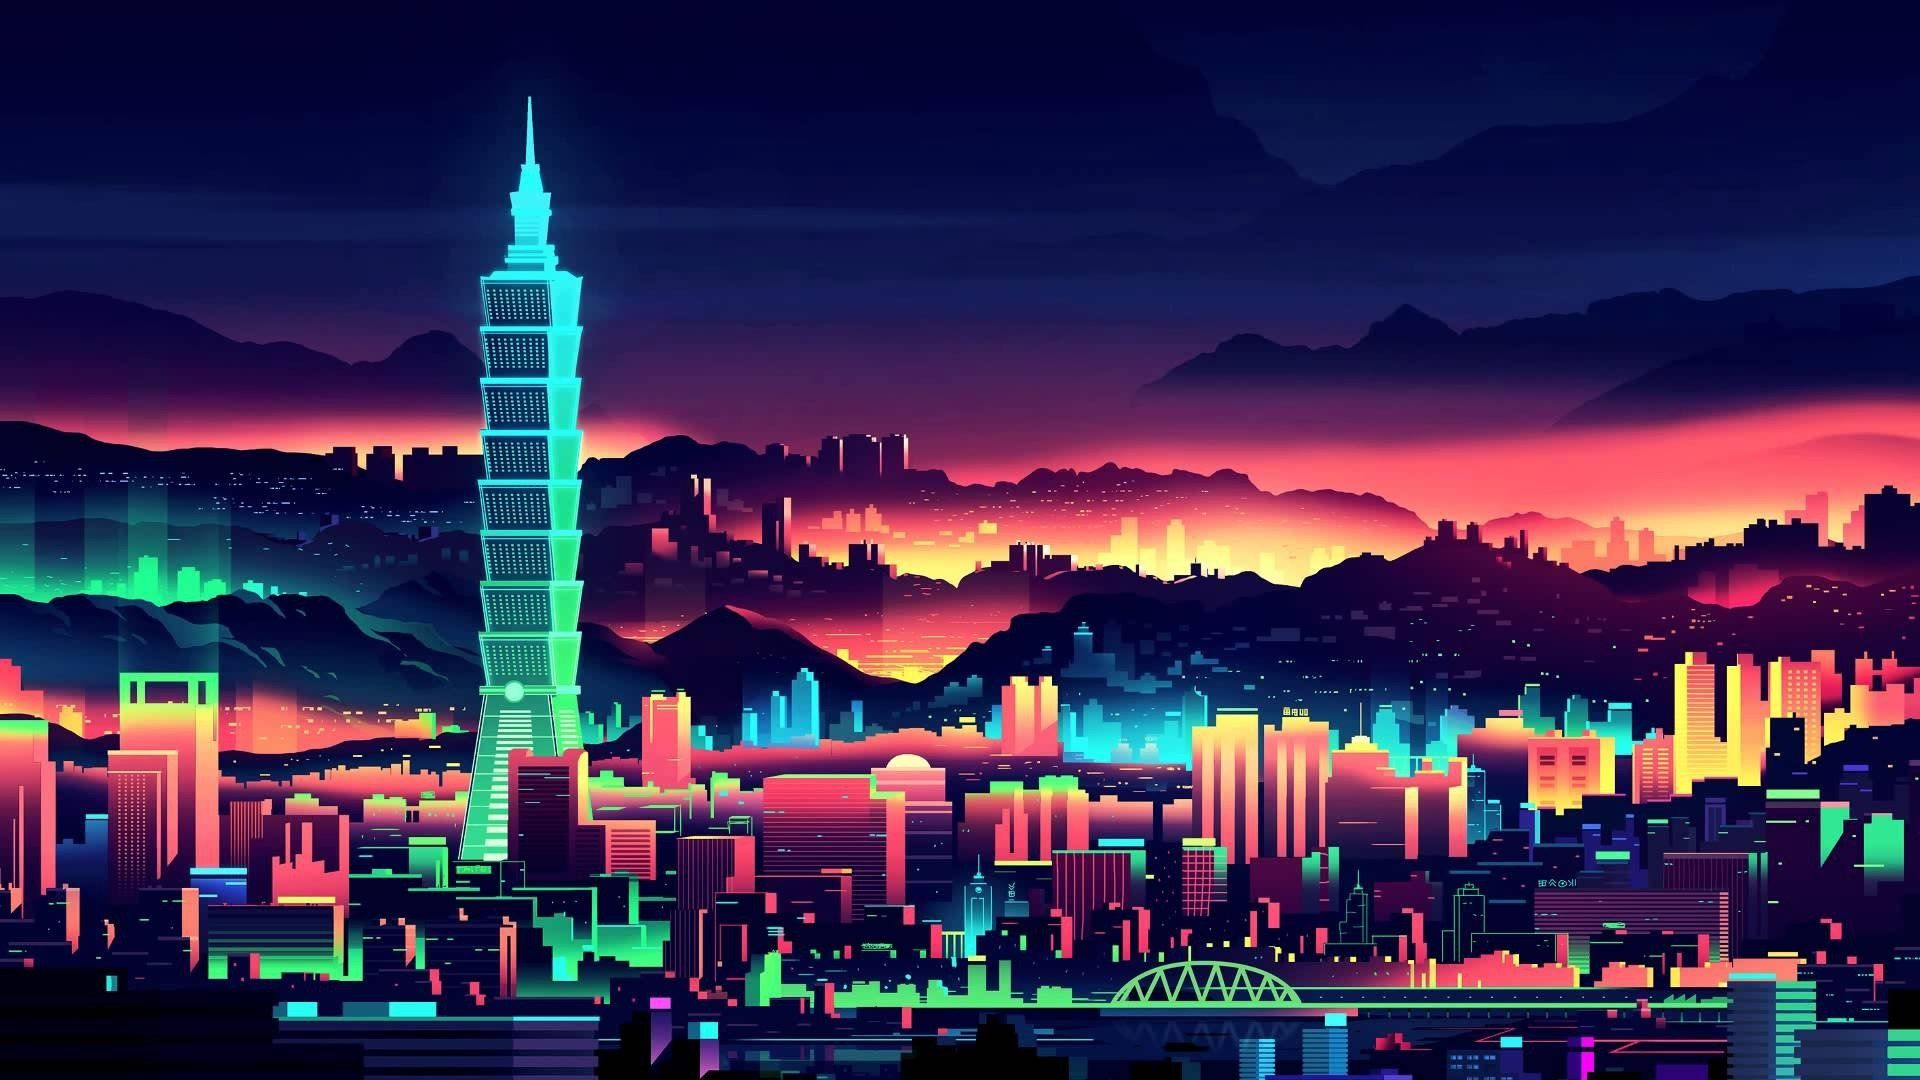 Neon Pc Wallpapers